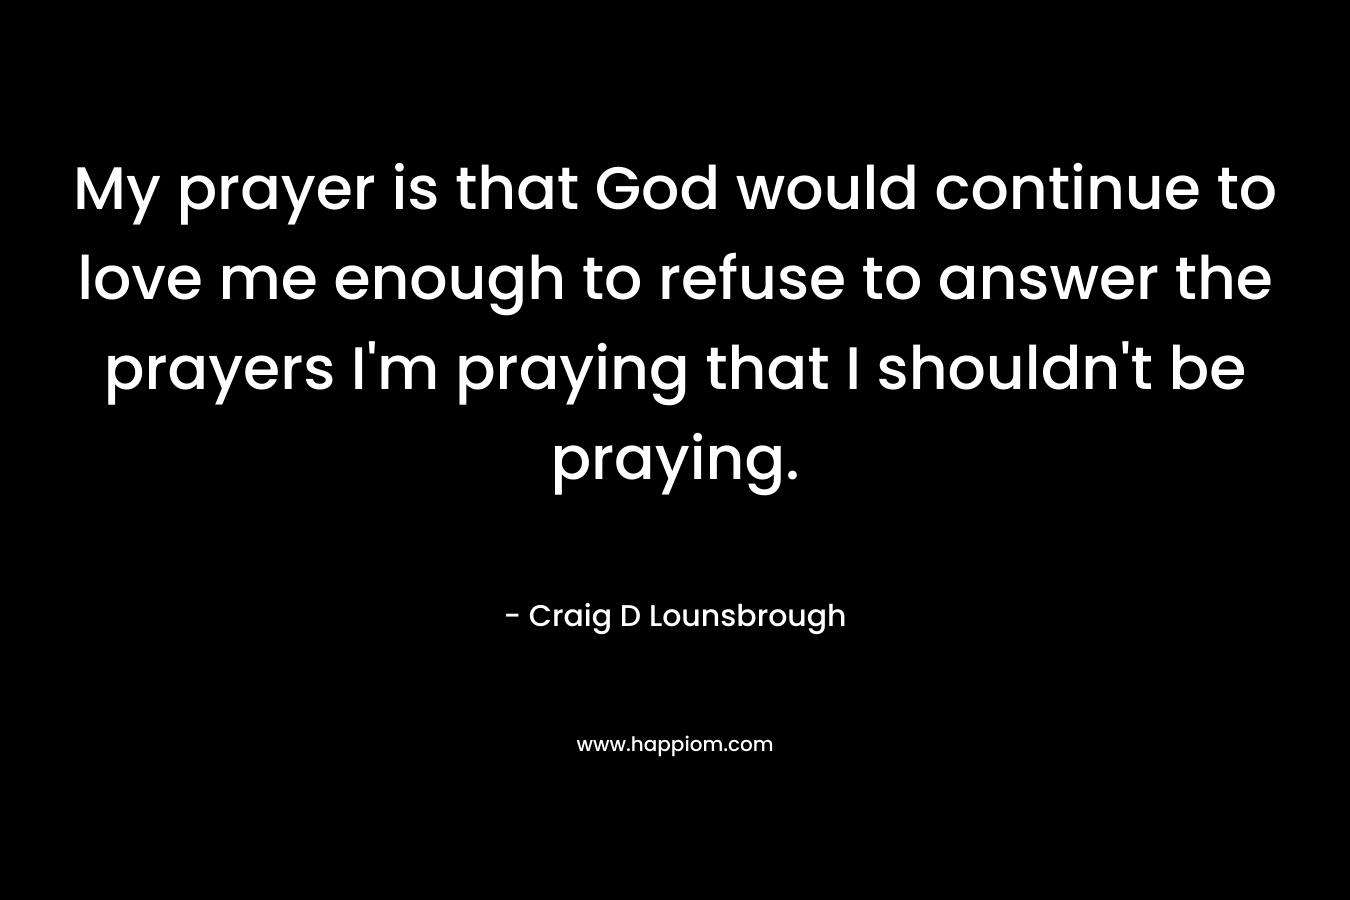 My prayer is that God would continue to love me enough to refuse to answer the prayers I'm praying that I shouldn't be praying.